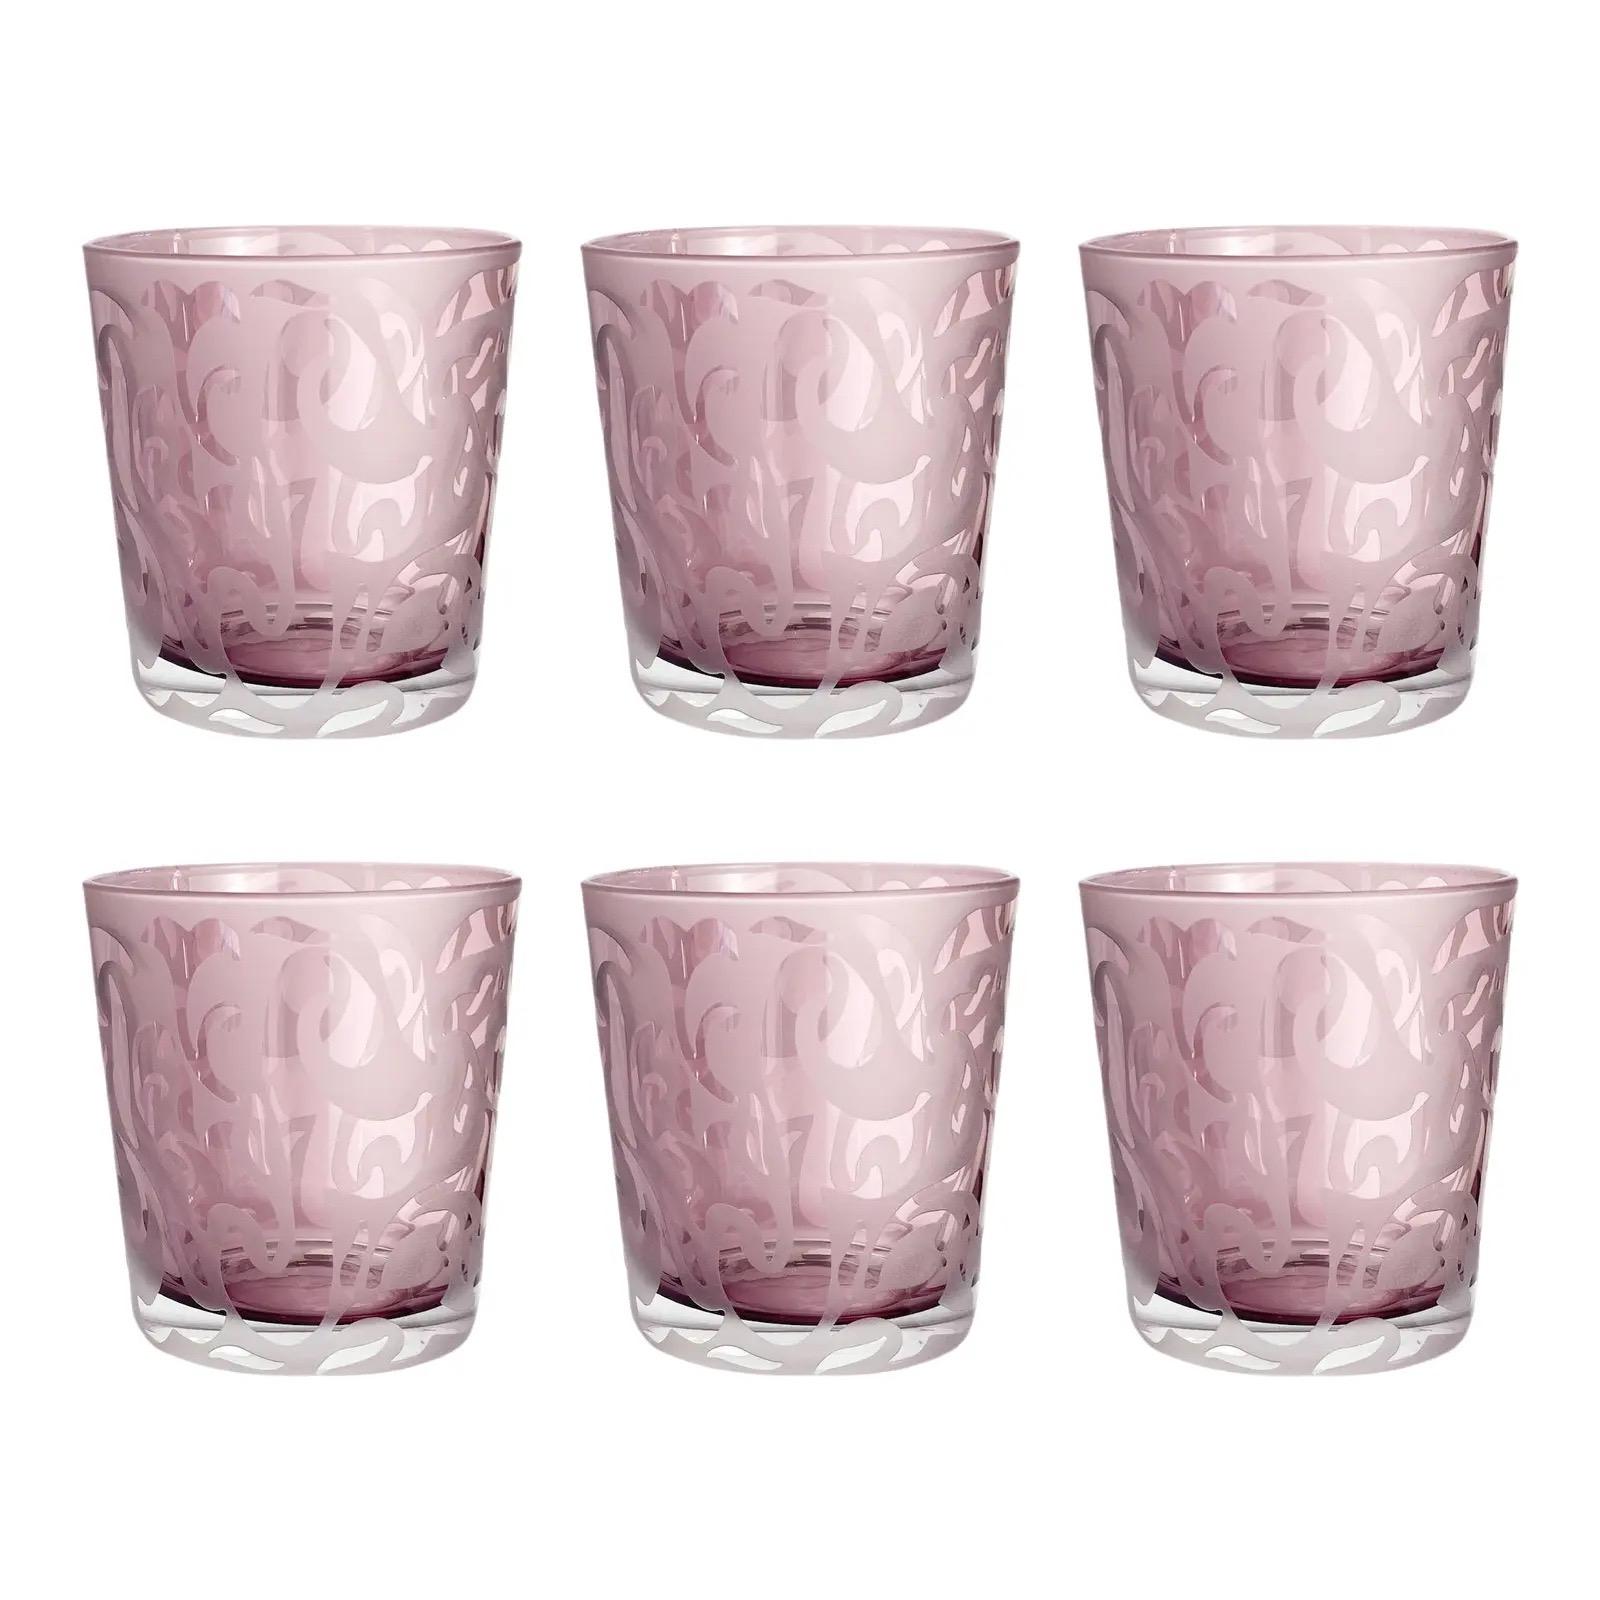 https://a.1stdibscdn.com/michael-weems-old-fashioned-tumbler-purple-glasses-set-of-6-for-sale/f_58672/1638229014292/mobilejpegupload_542CC67229E1435EA66CCE12DFD2A1AD_master.jpg